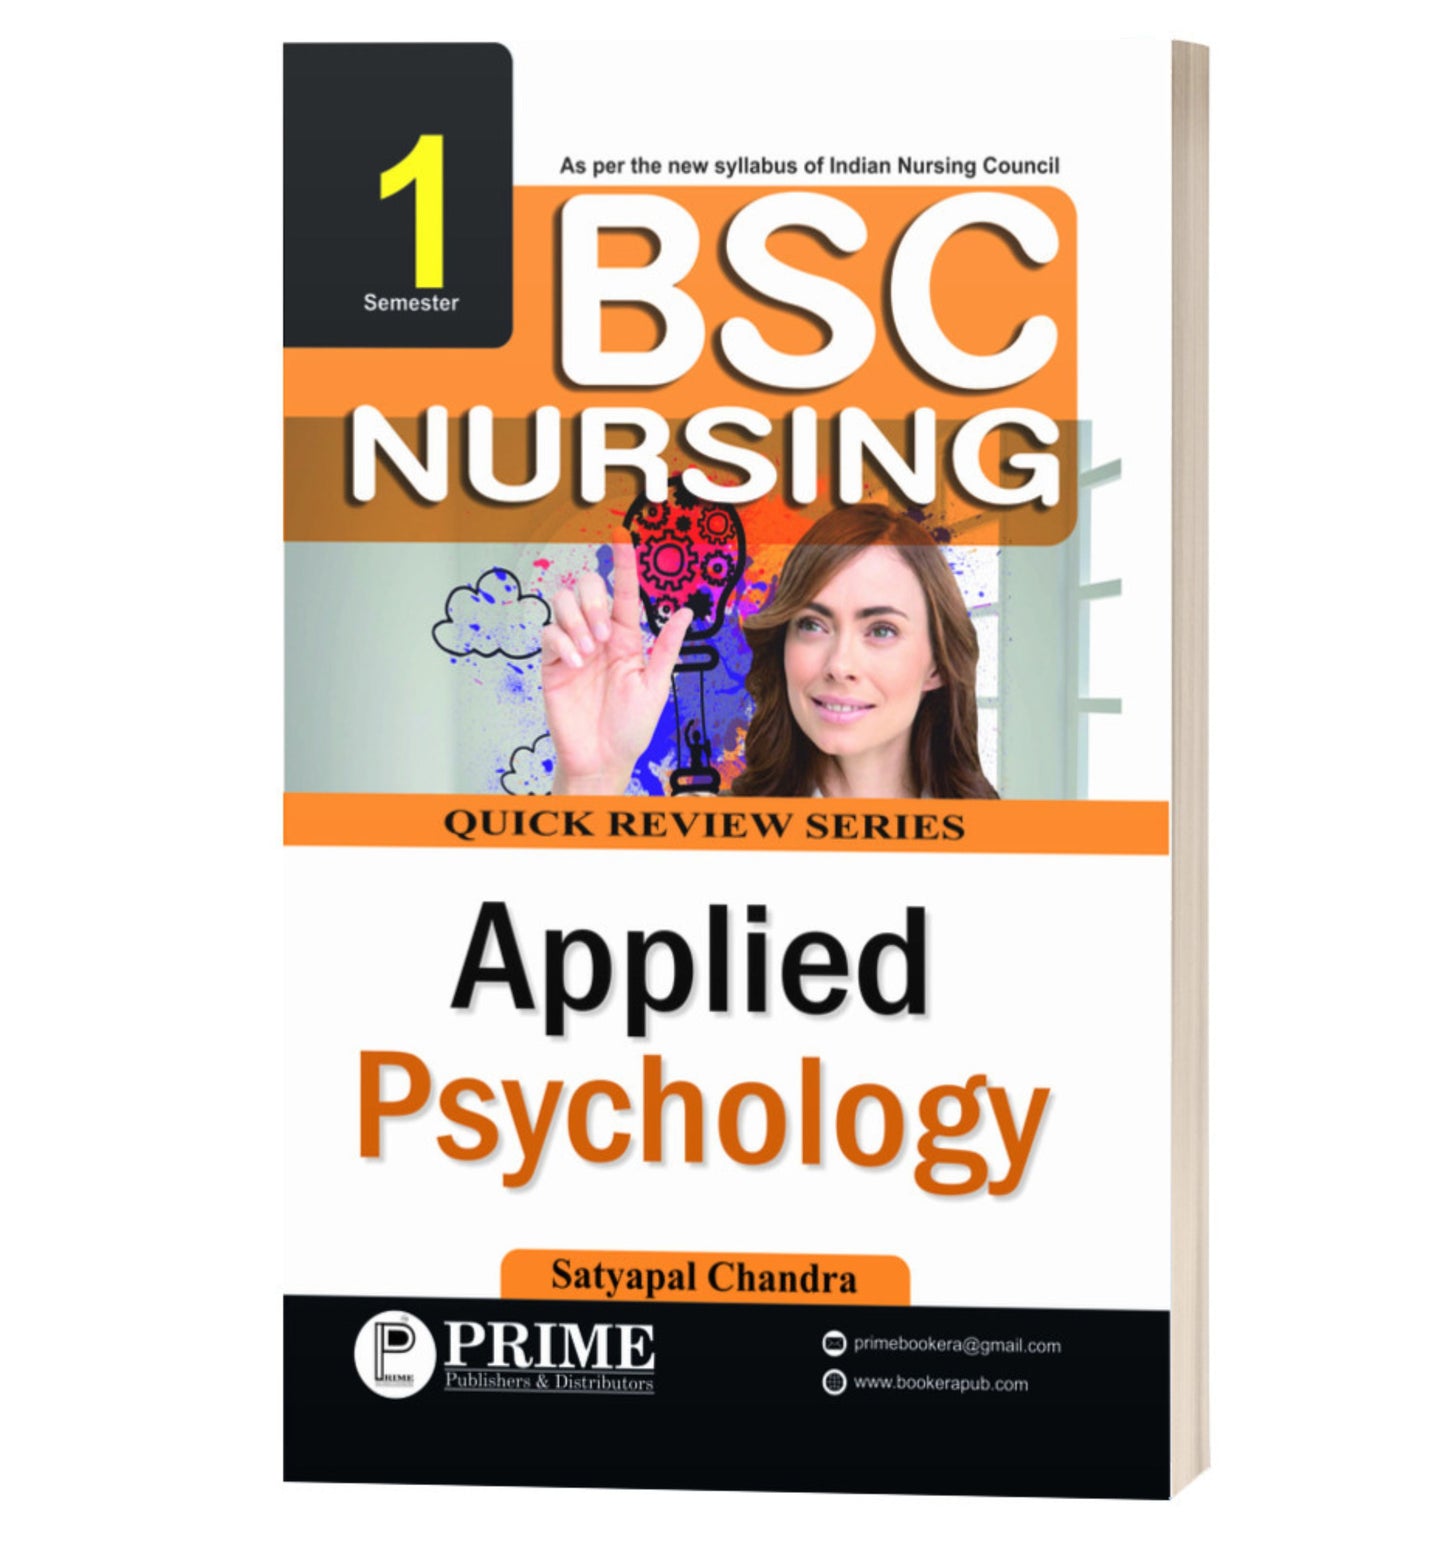 Quick Review Series of Applied Psychology